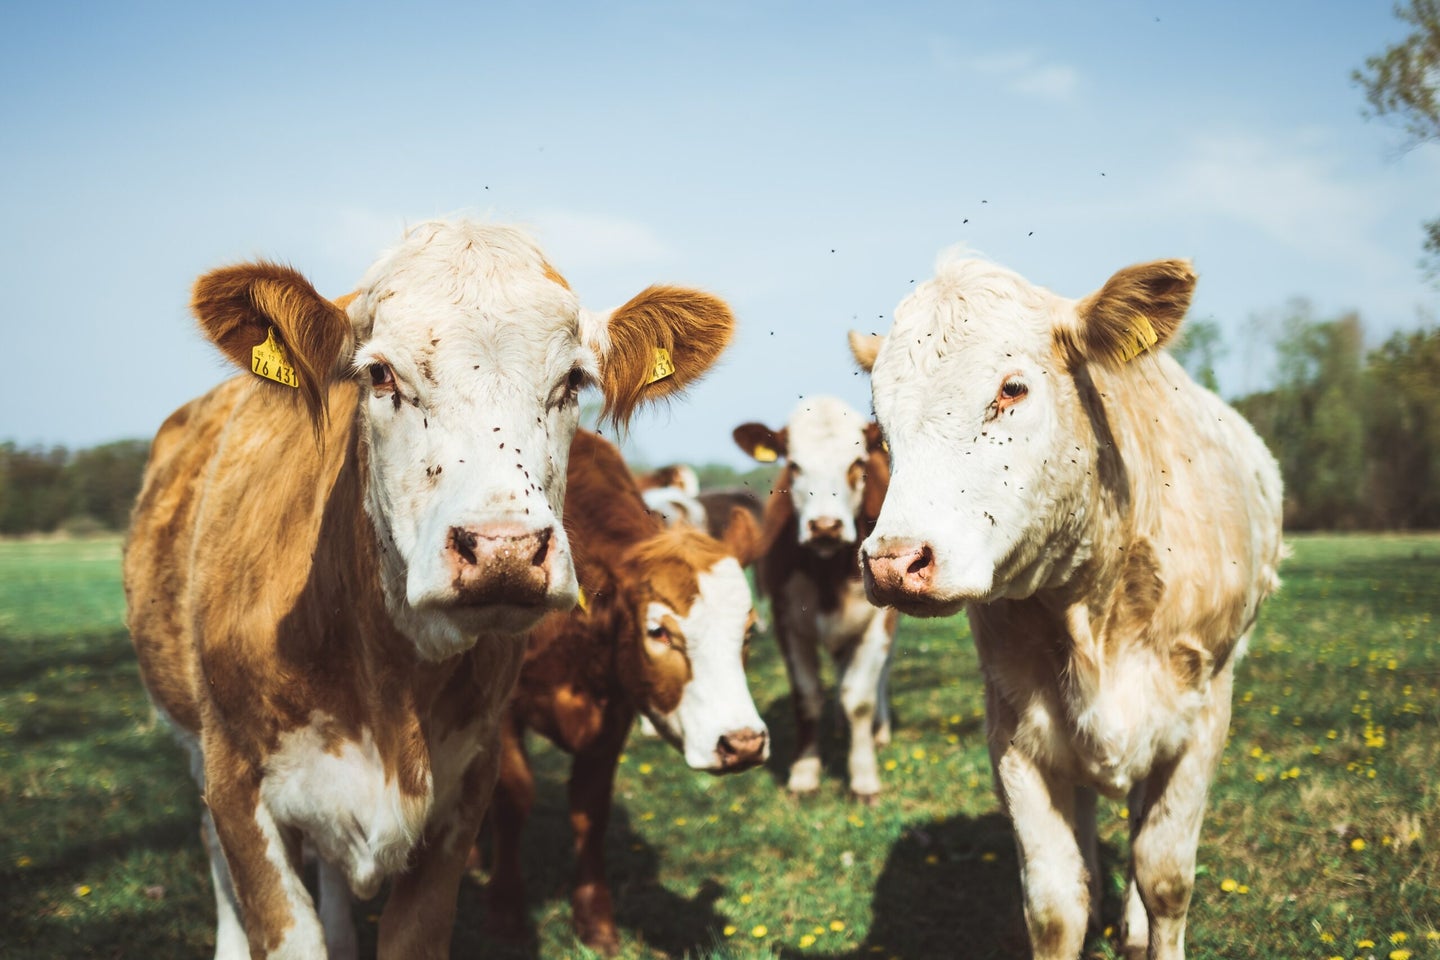 Four ways to make beef more sustainable